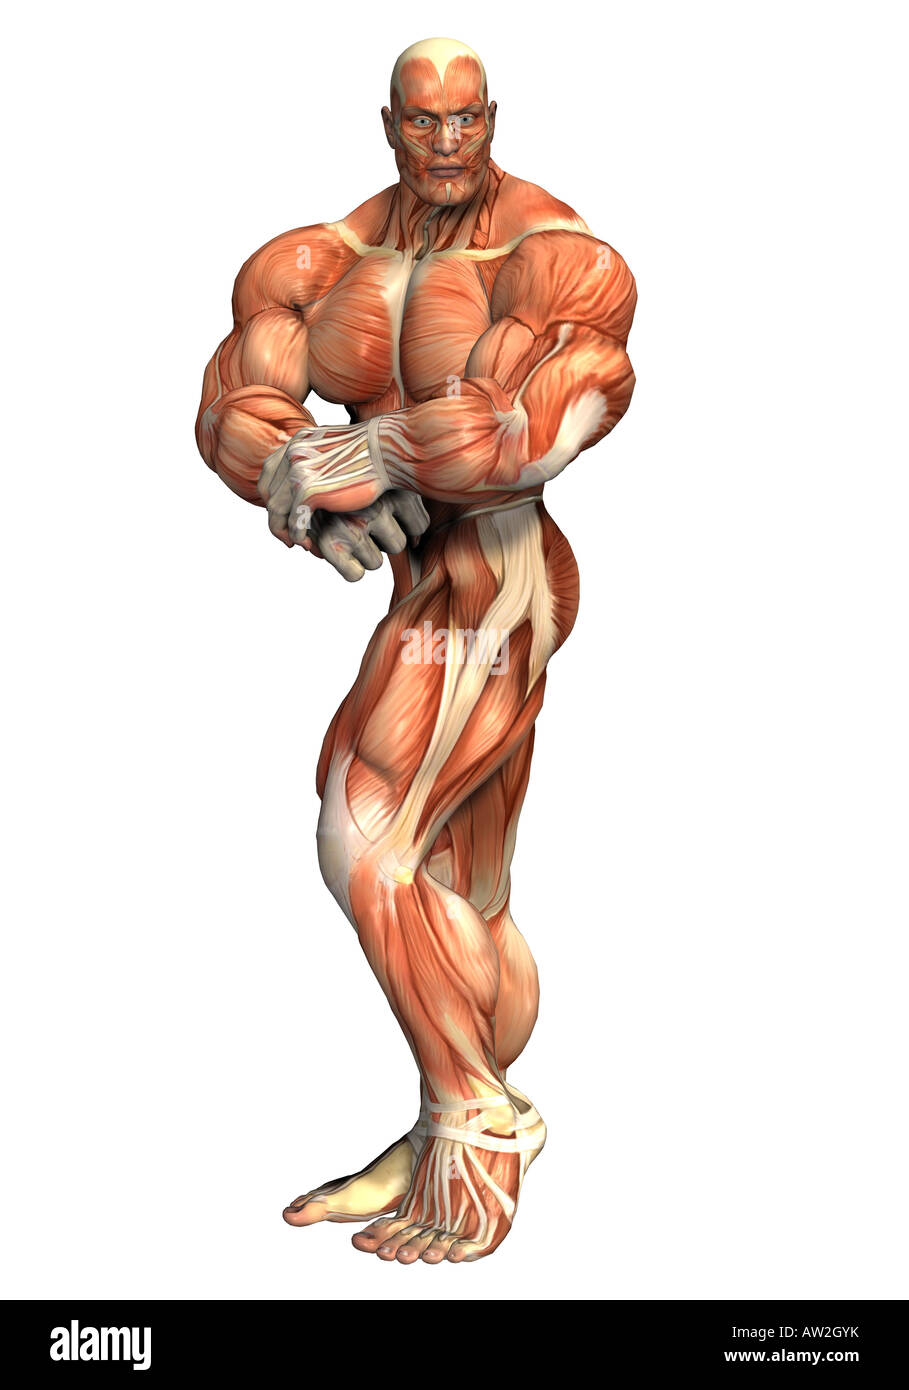 musculature of humans Stock Photo